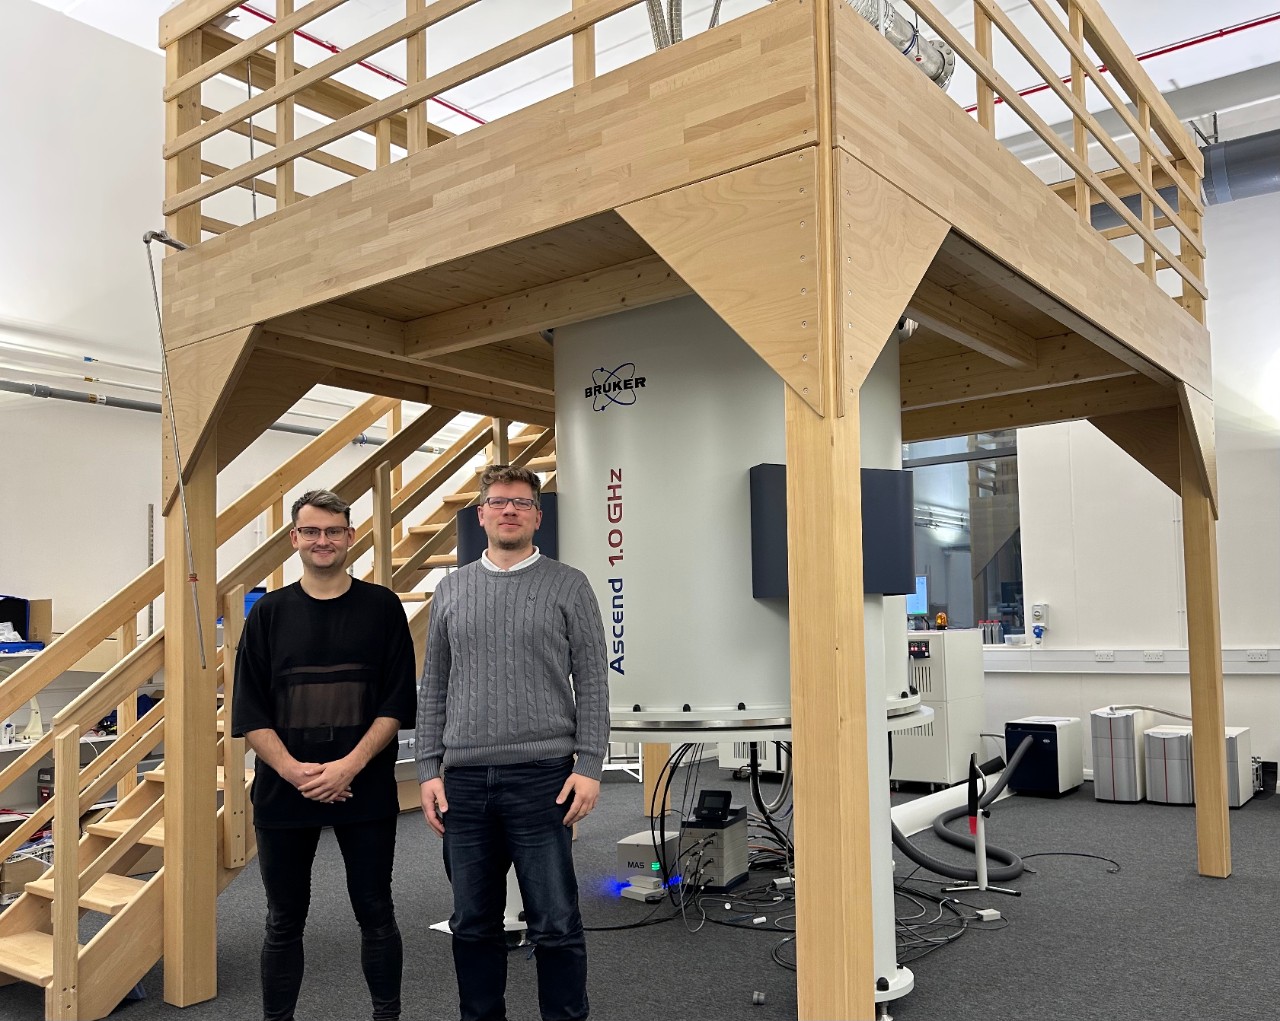 Dr Dominik J. Kubicki and Dr Benjamin Gallant in front of the Bruker flagship 1 GHz solid-state NMR system in the UK High-Field Solid-State NMR Facility at Warwick